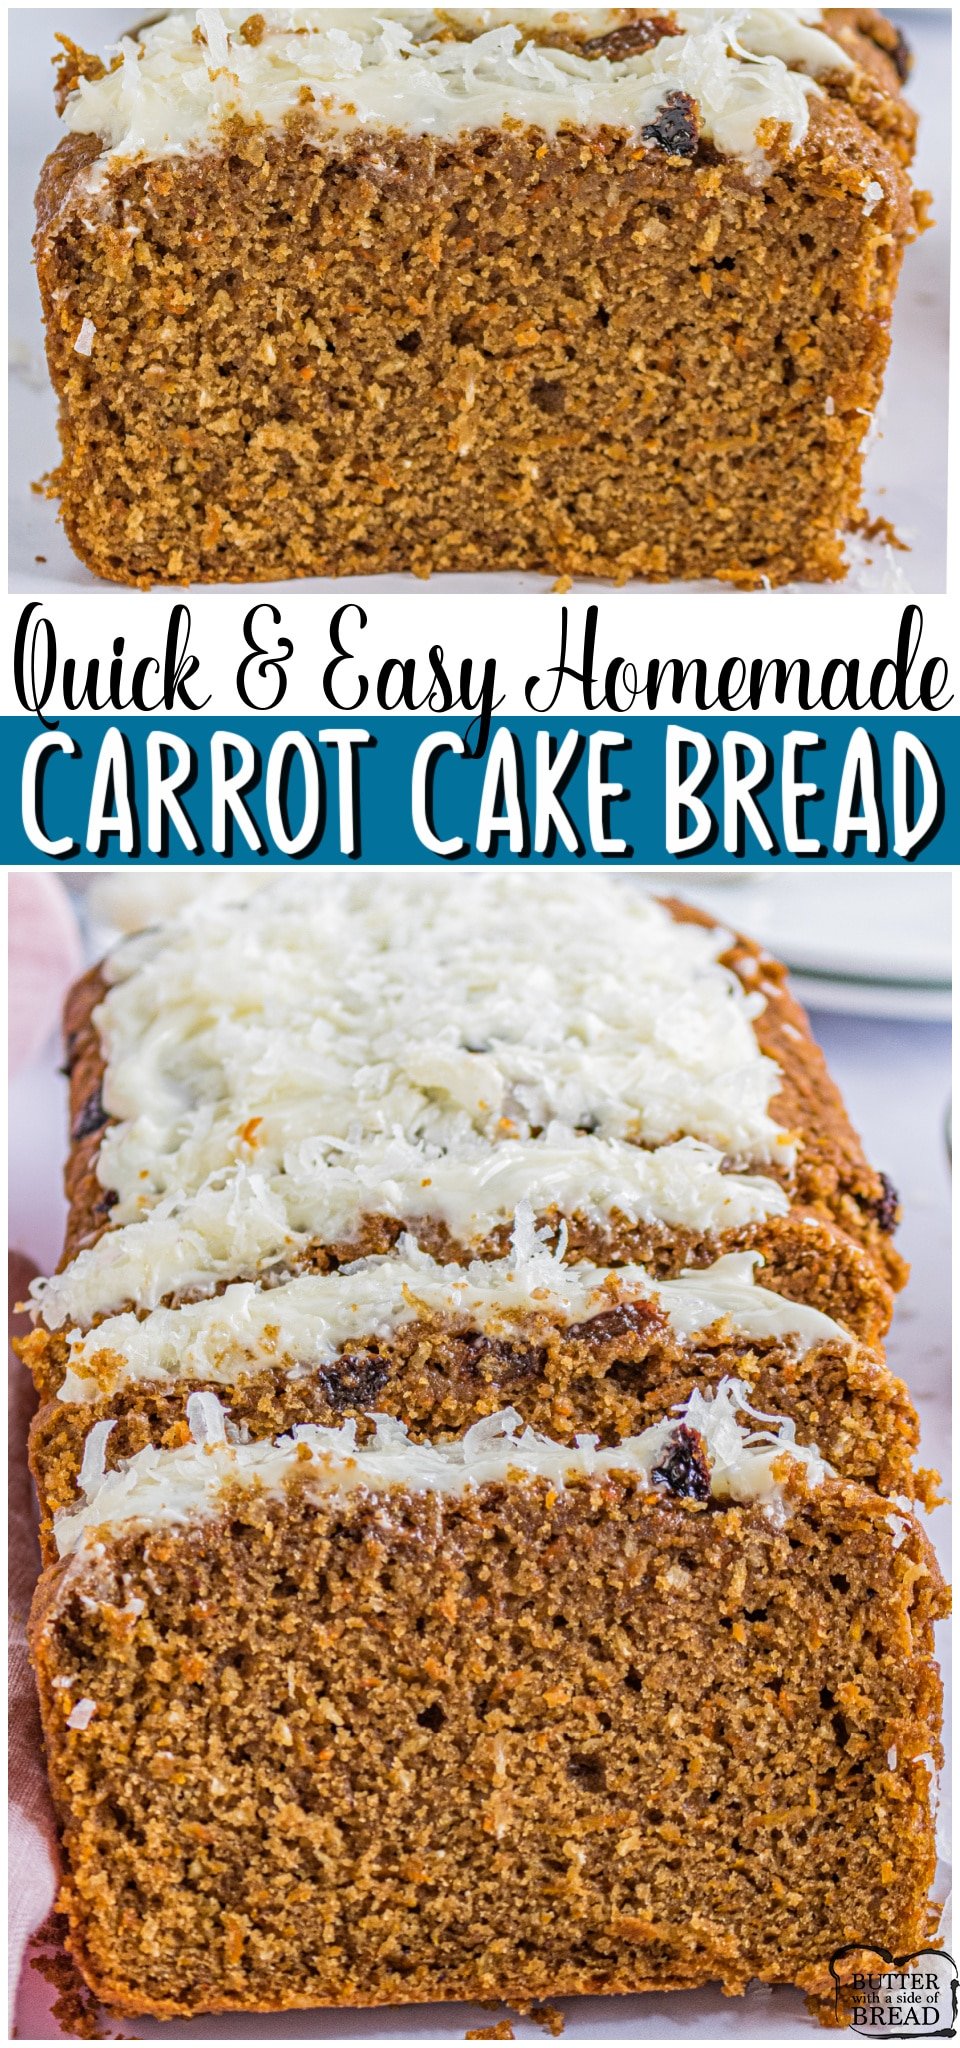 Carrot cake bread is everything you love about Carrot Cake in bread form! Spiced sweet bread with coconut & raisins, topped with a lovely cream cheese frosting. #bread #carrotcake #creamcheesefrosting #baking #easyrecipe from BUTTER WITH A SIDE OF BREAD